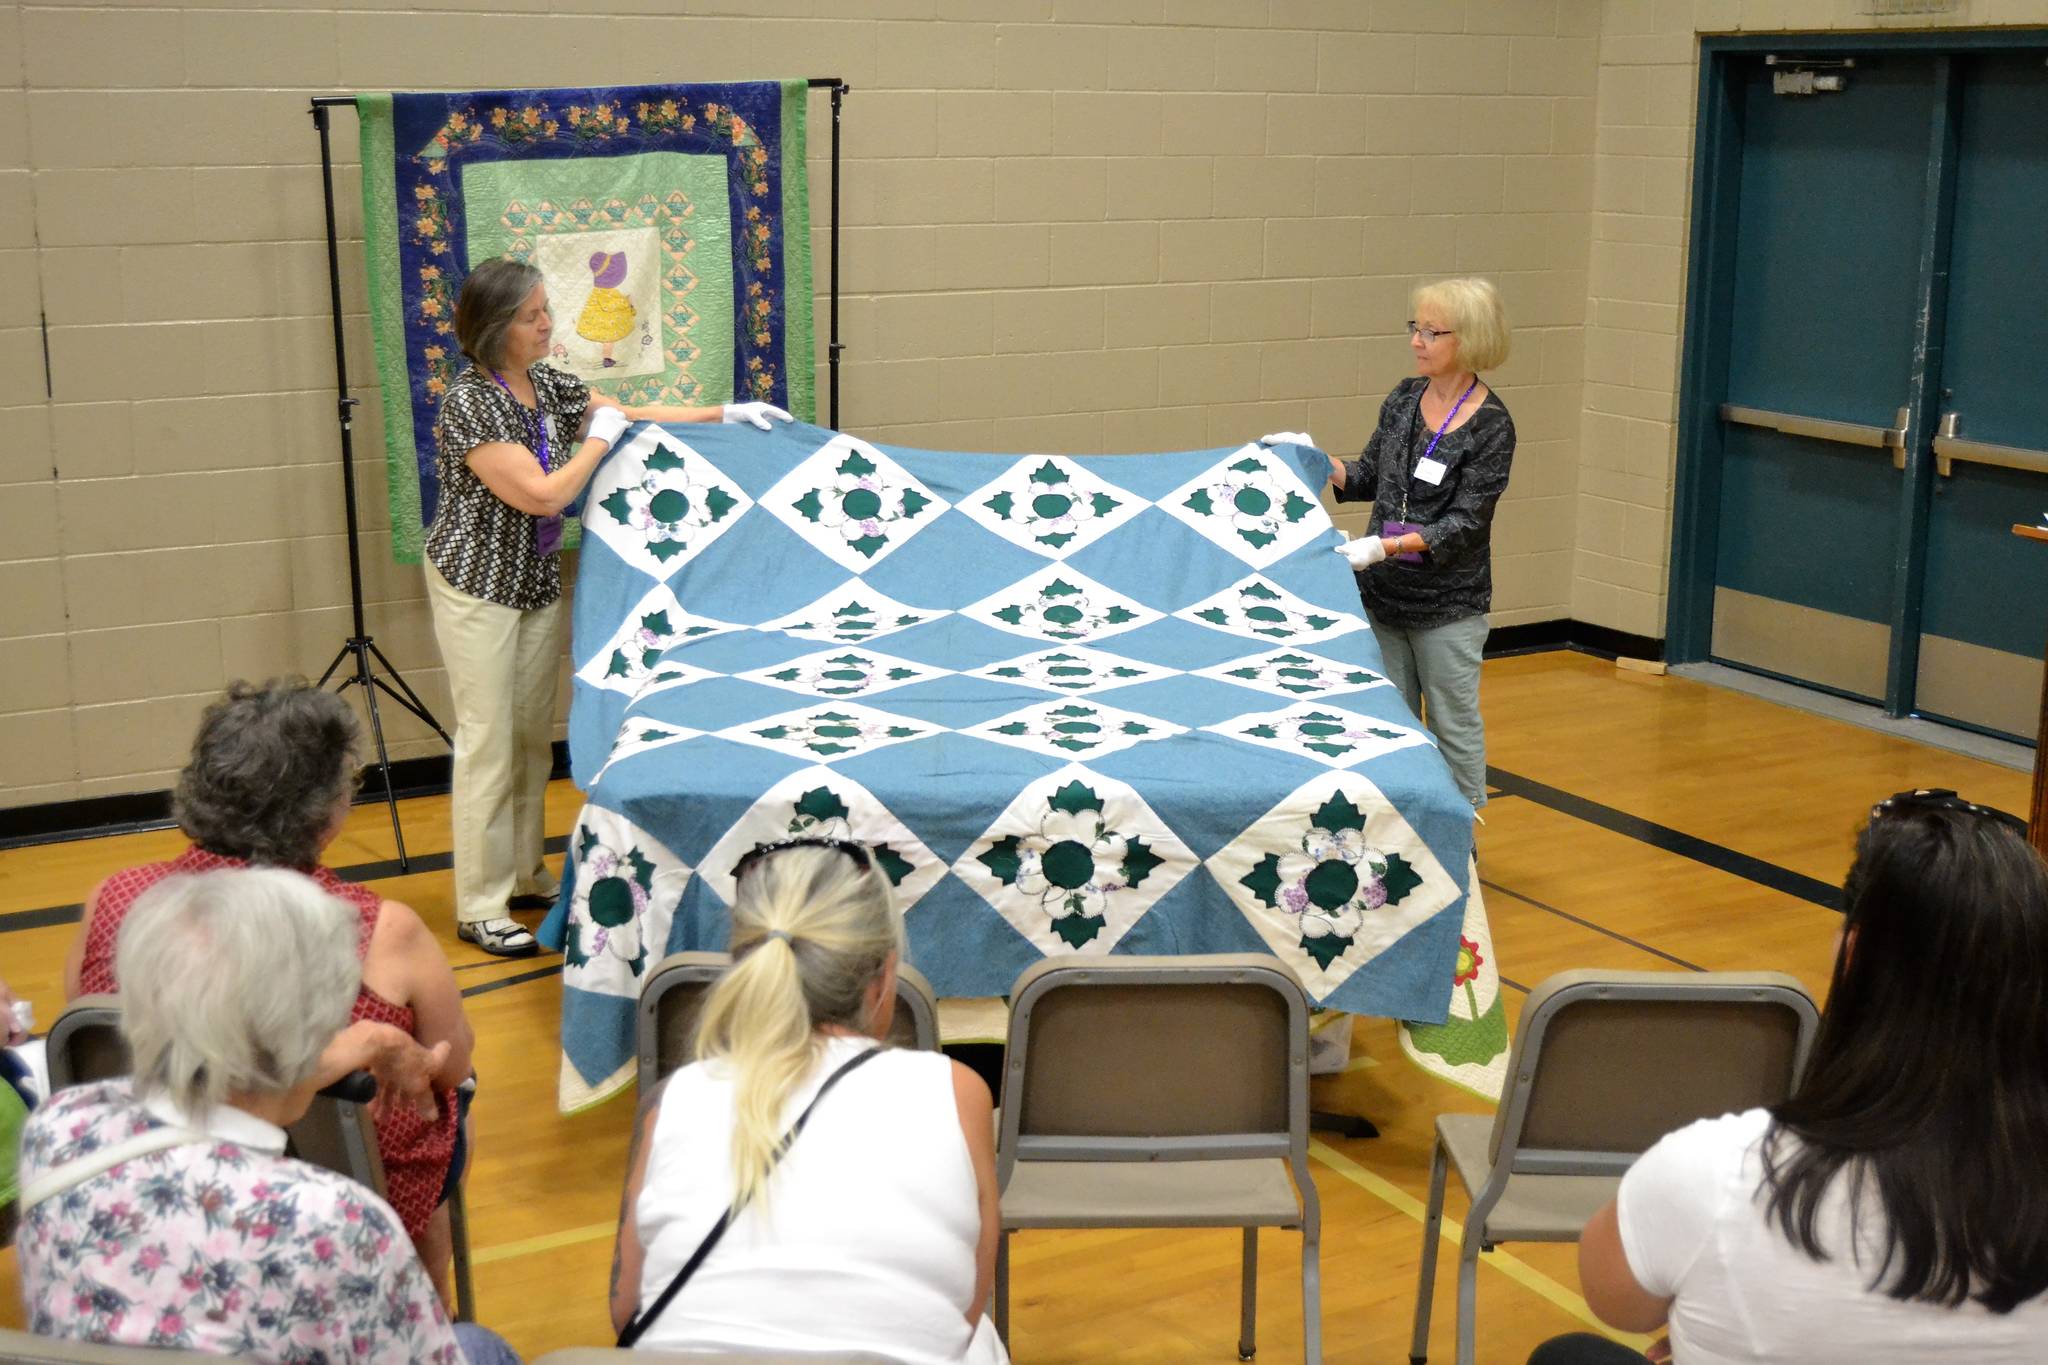 Barbara McArthur, left, and Nancy Davison of the Sunbonnet Sue Quilt Club turn a quilt made by Laura Hutzler’s at-the-time 97-year-old grandmother. The quilt was one of many quilts displayed during the club’s annual show July 20-22. Sequim Gazette photo by Matthew Nash